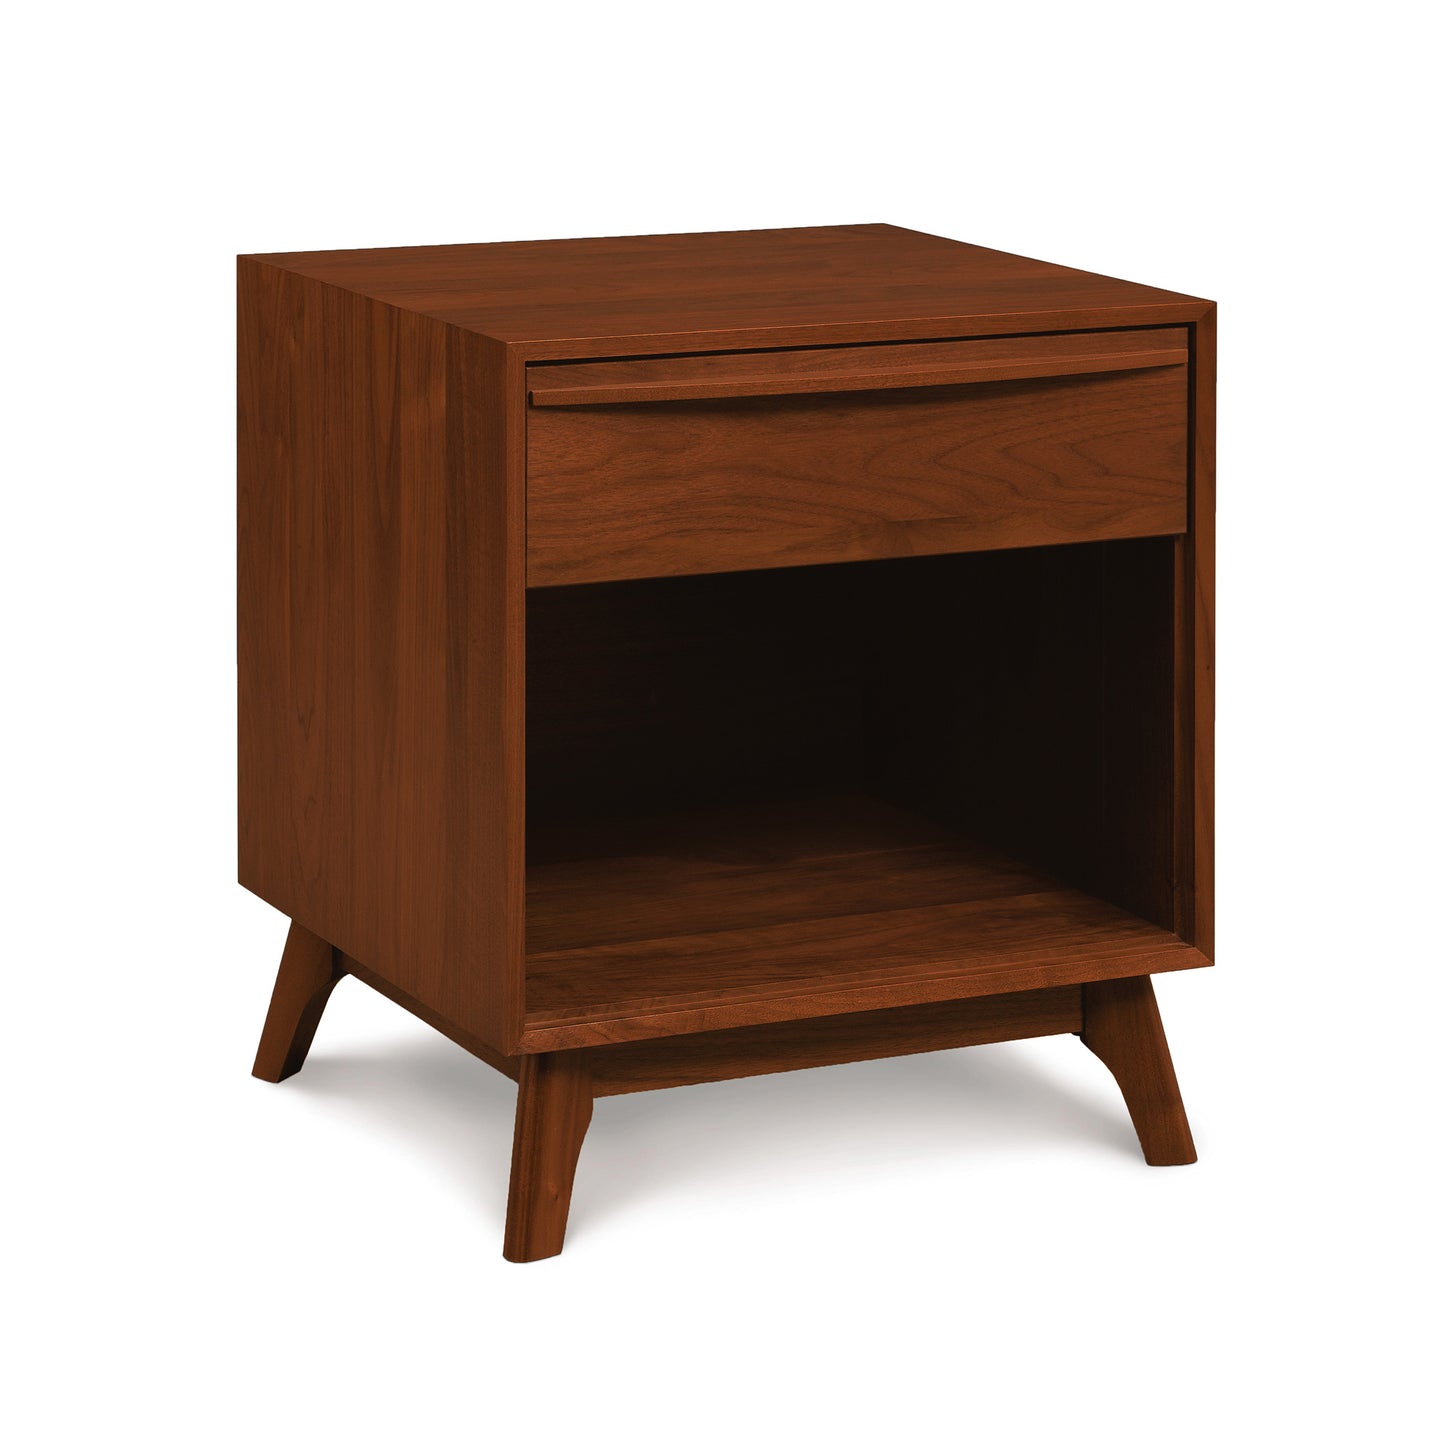 A Catalina 1-Drawer Enclosed Shelf Nightstand from Copeland Furniture, featuring a single drawer and an open shelf, set against a white background.